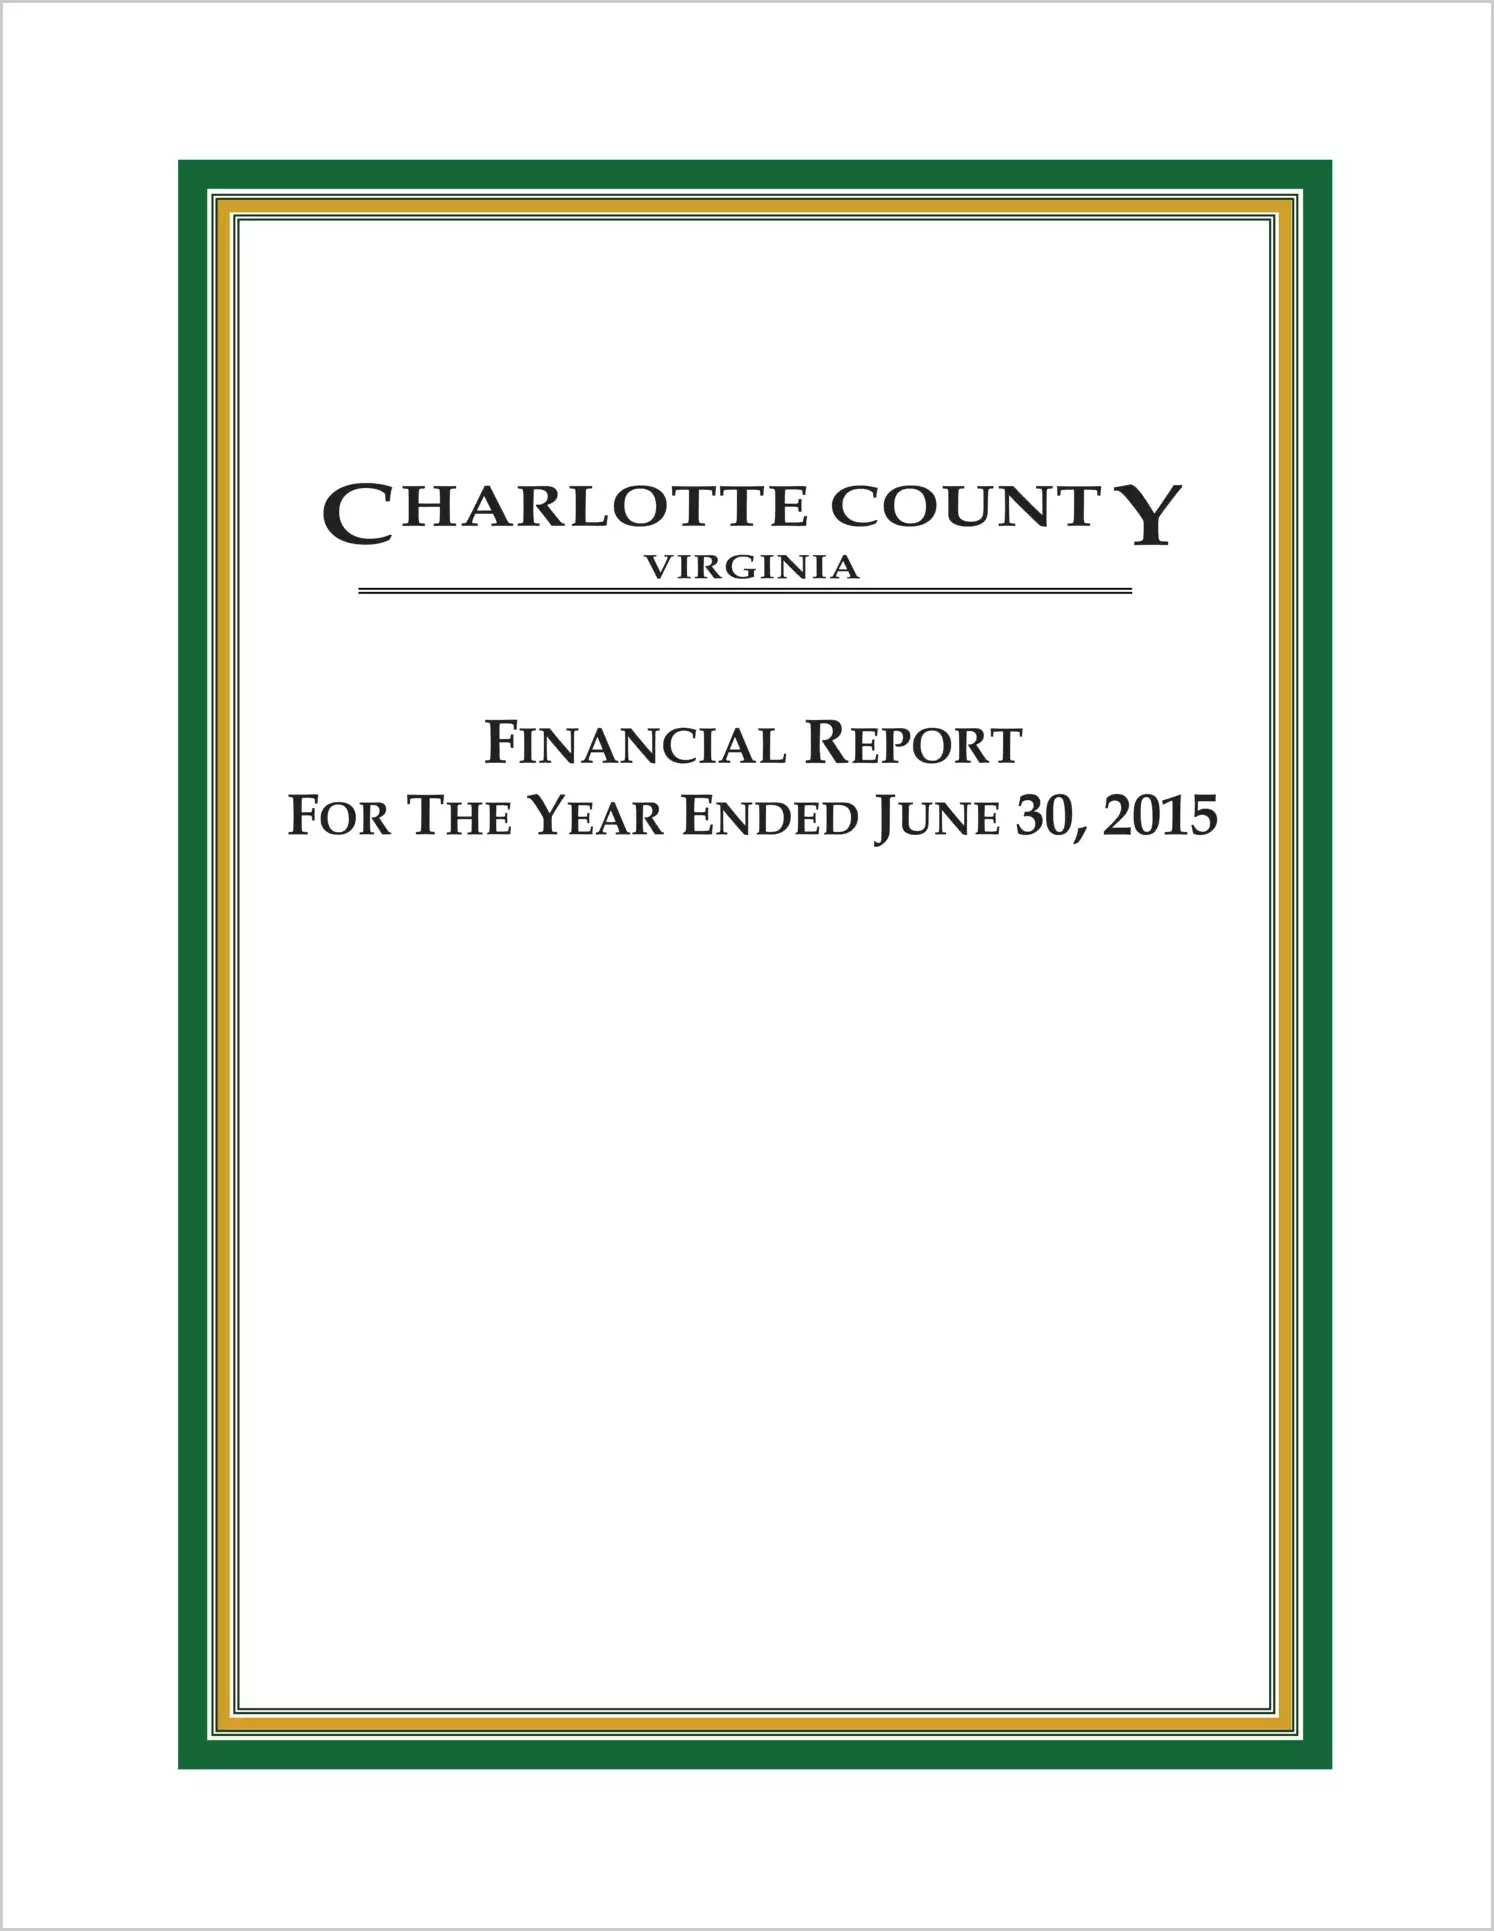 2015 Annual Financial Report for County of Charlotte